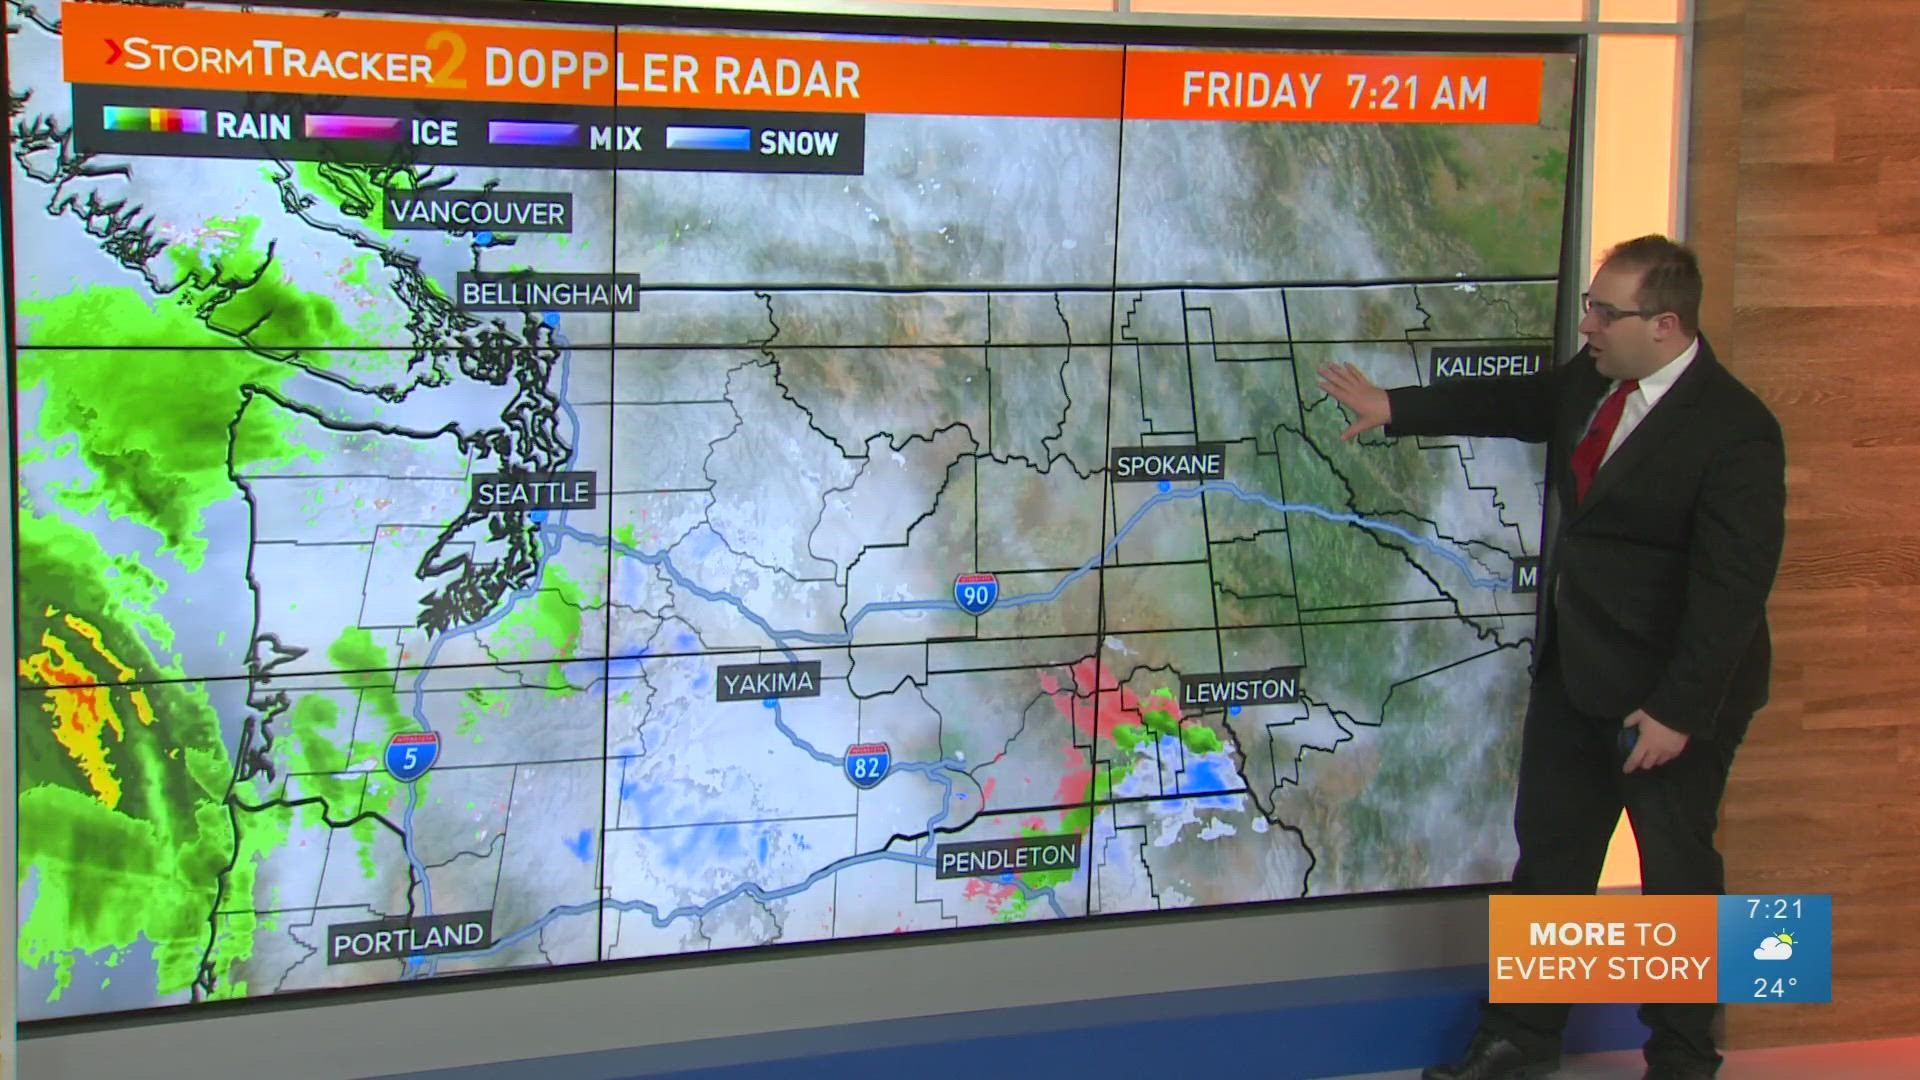 Spokane could see some light rain and mild temperatures as we head into the weekend.